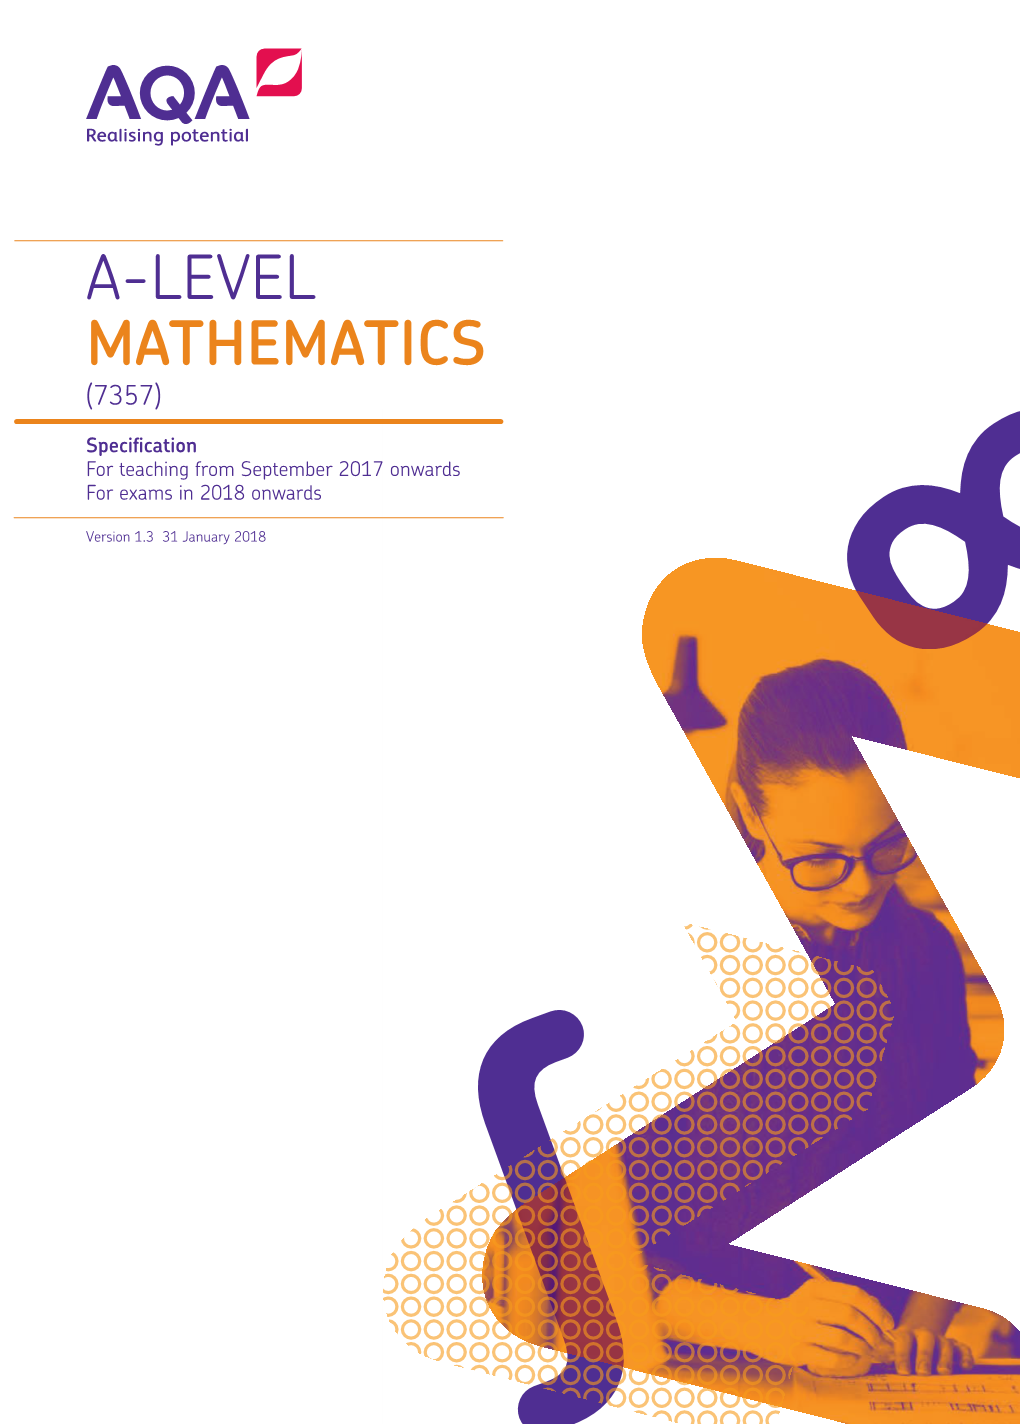 A-Level Mathematics Specifications and All Exam Boards